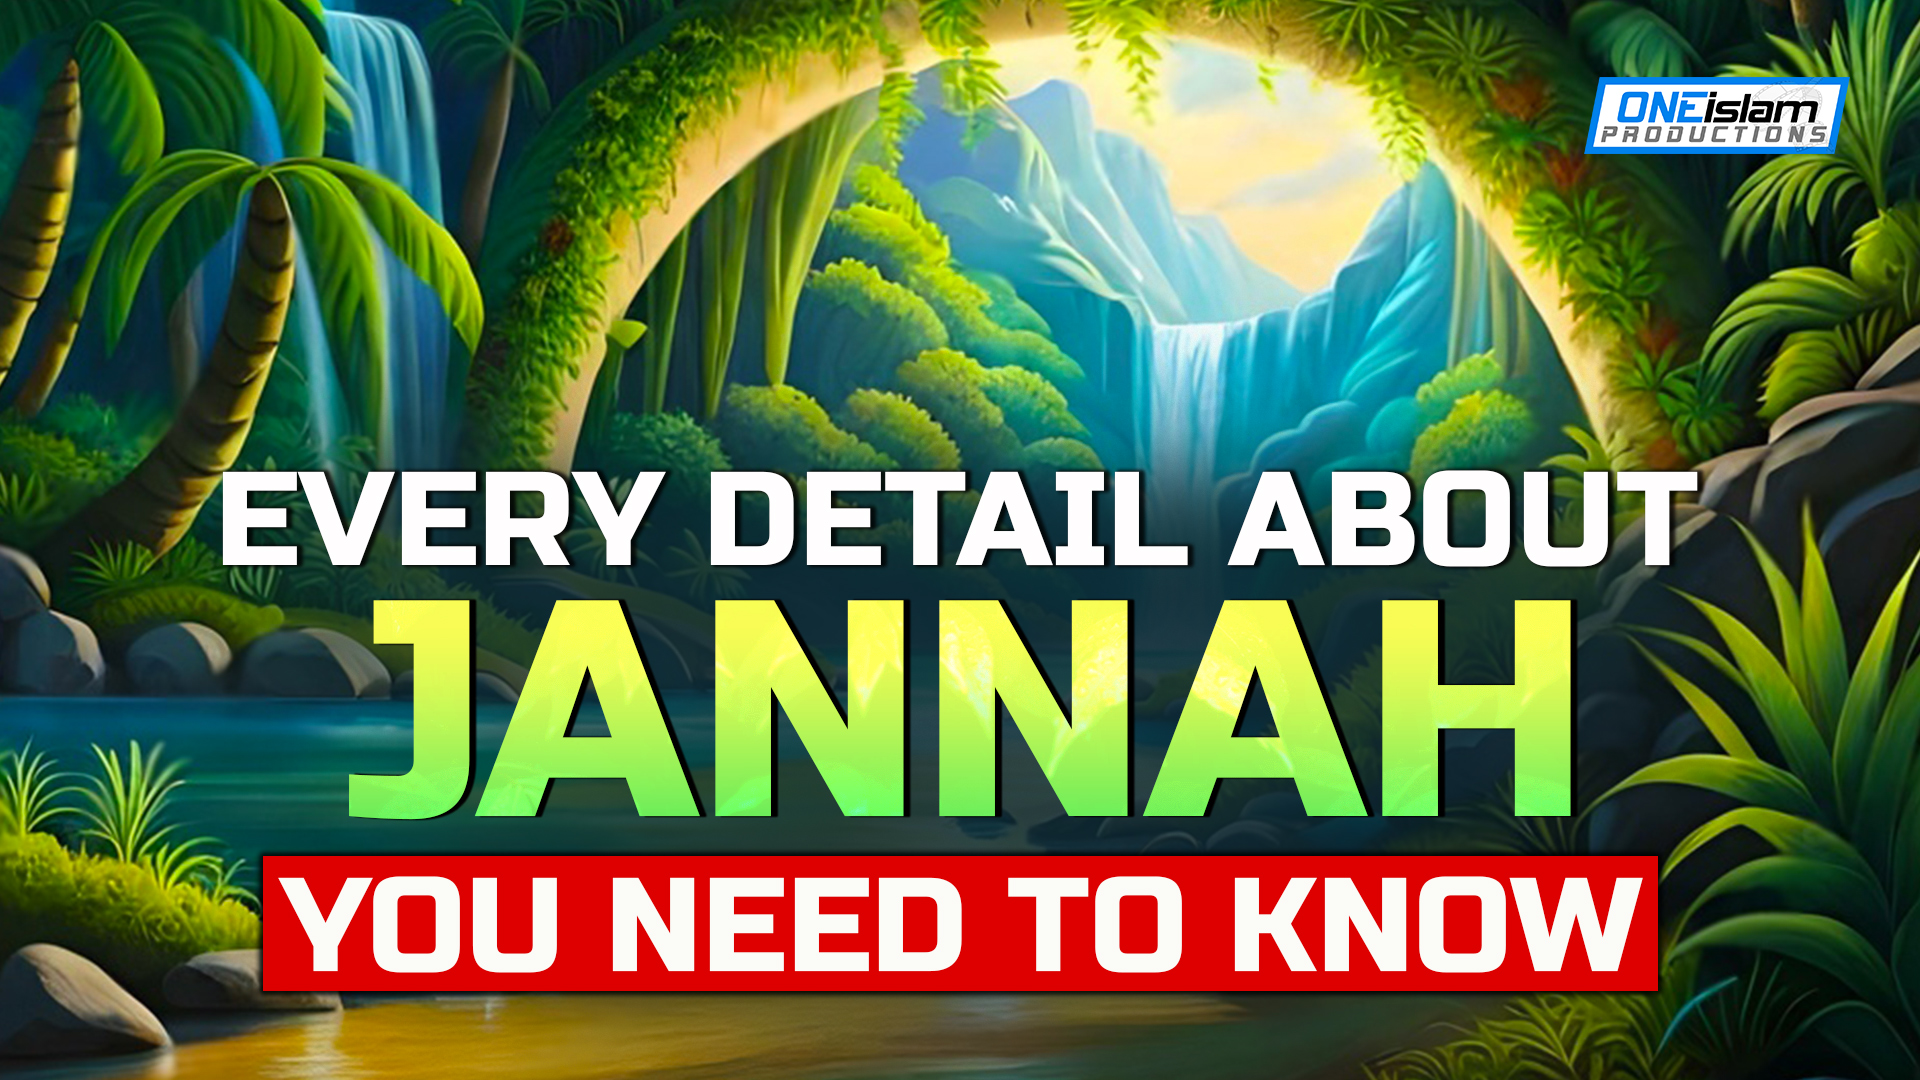 Every-Detail-About-Jannah-You-Need-To-Know (2)